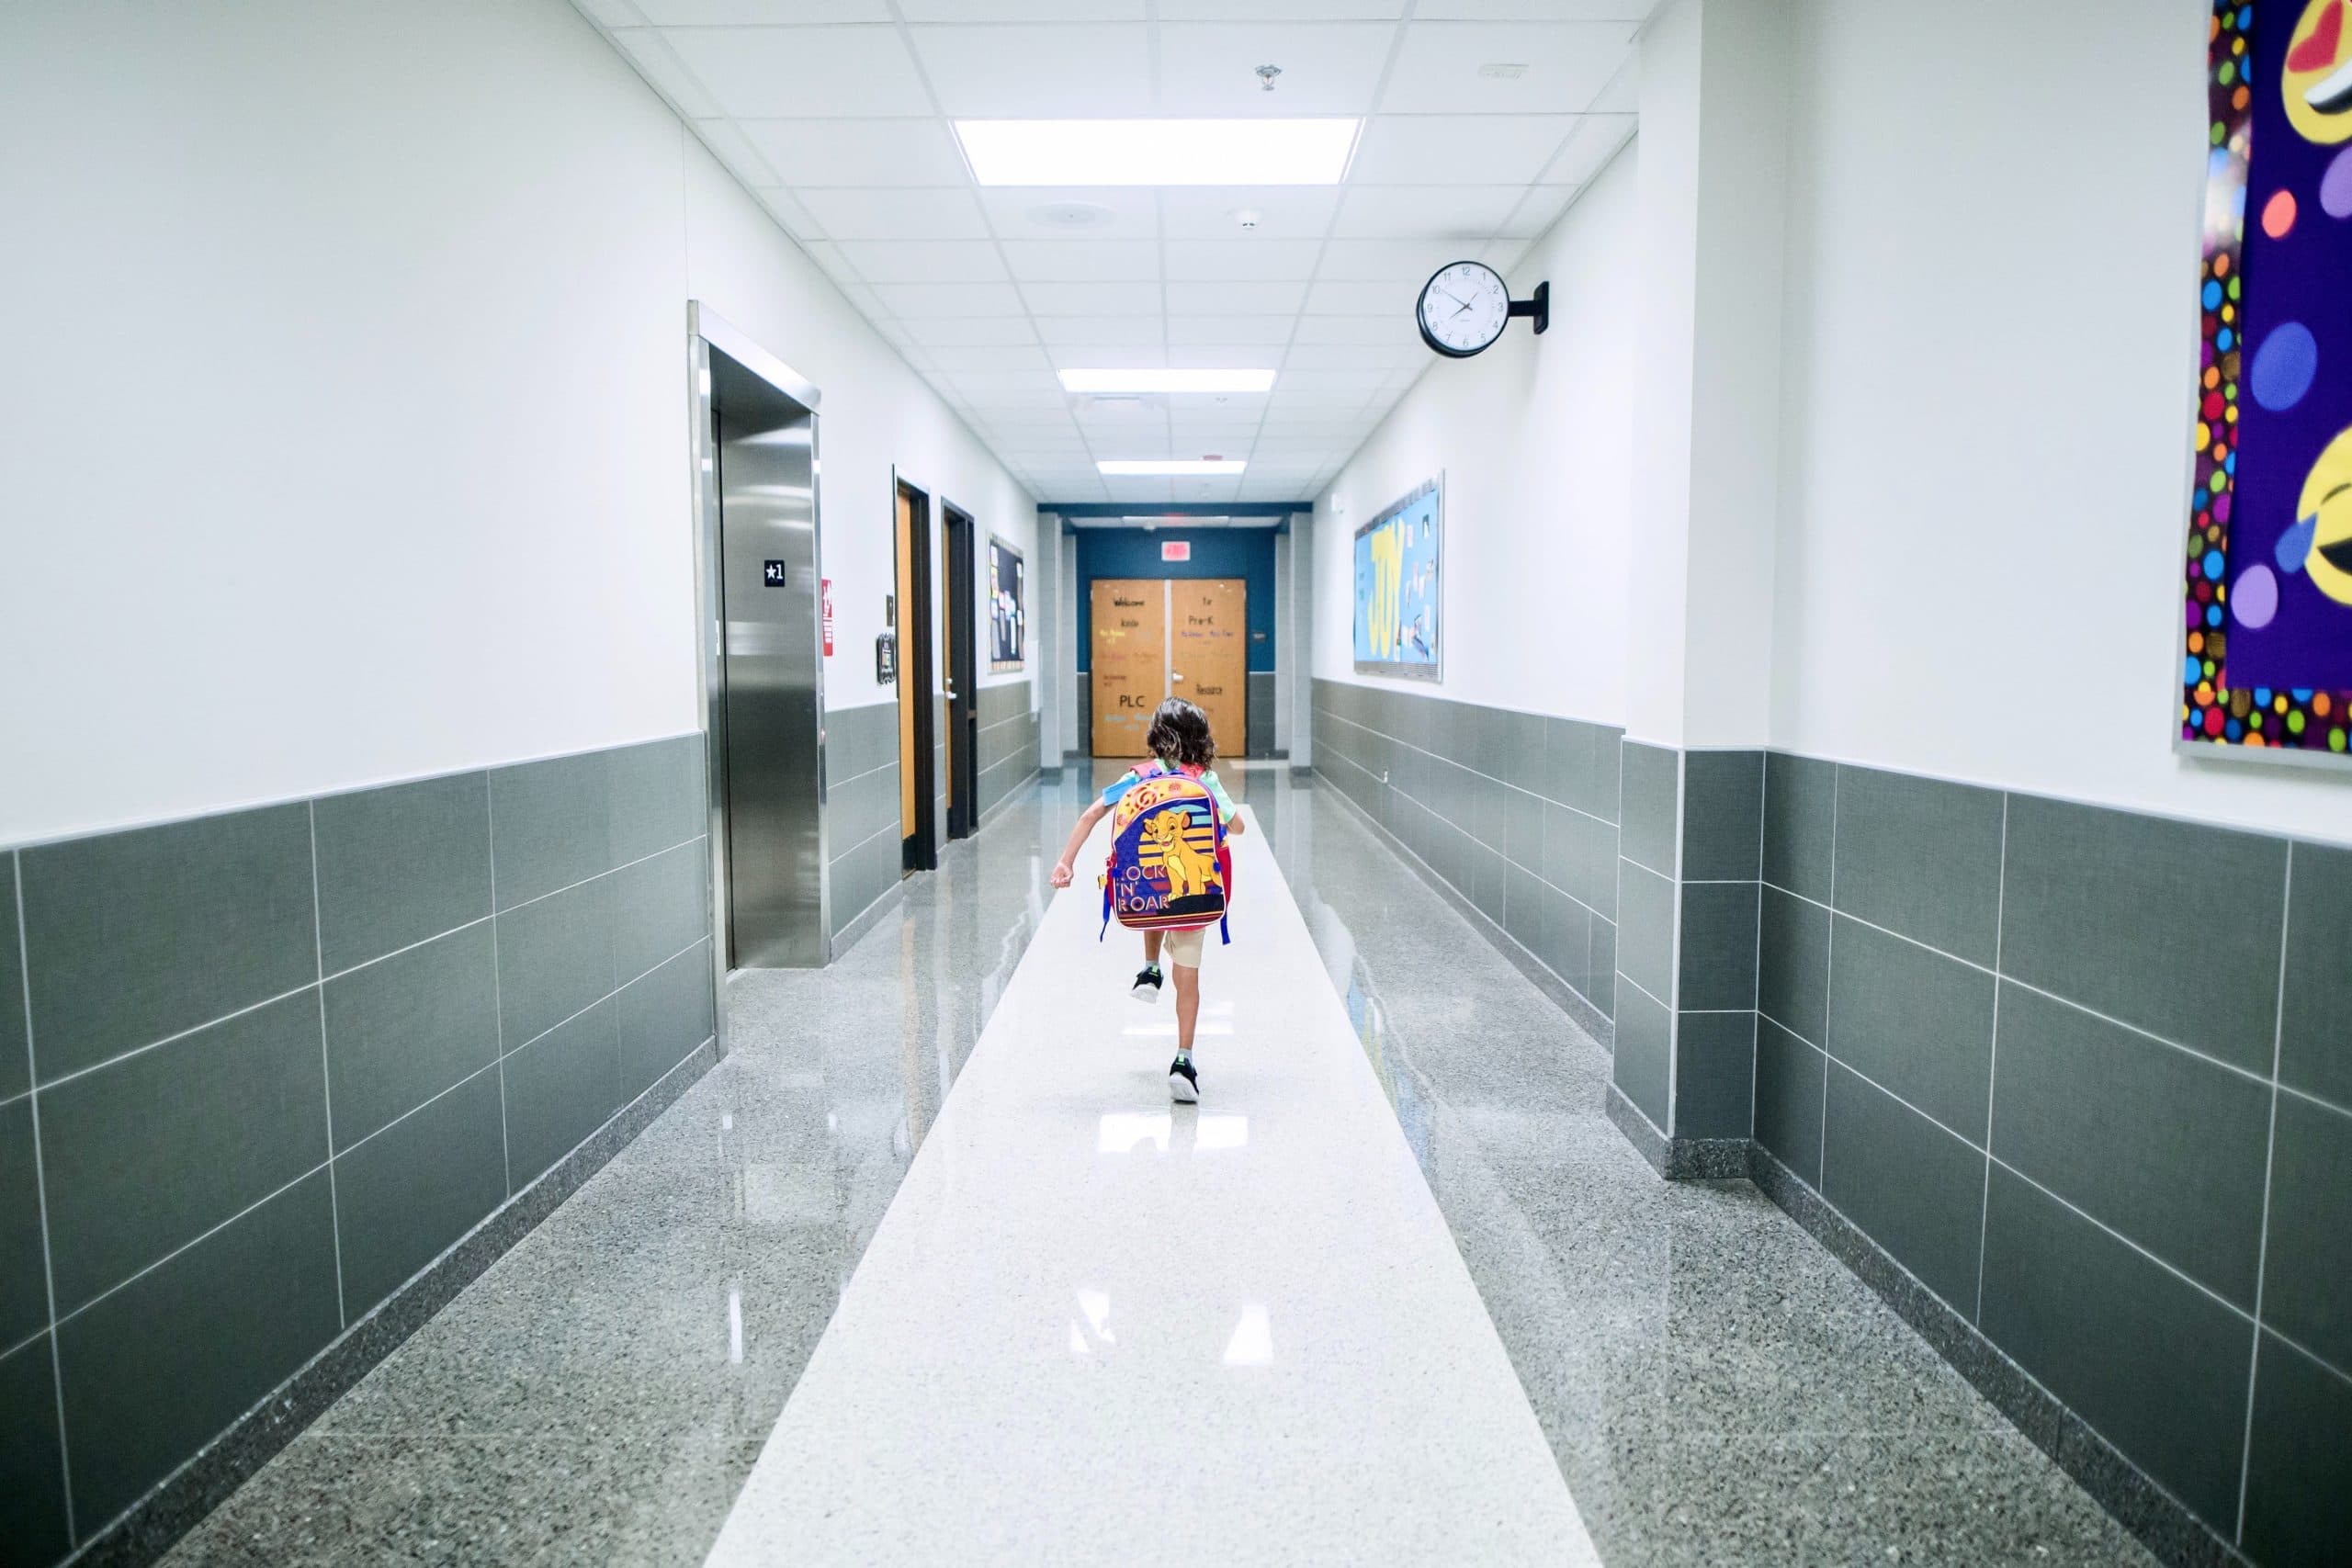 K-12 districts need cloud-based school security